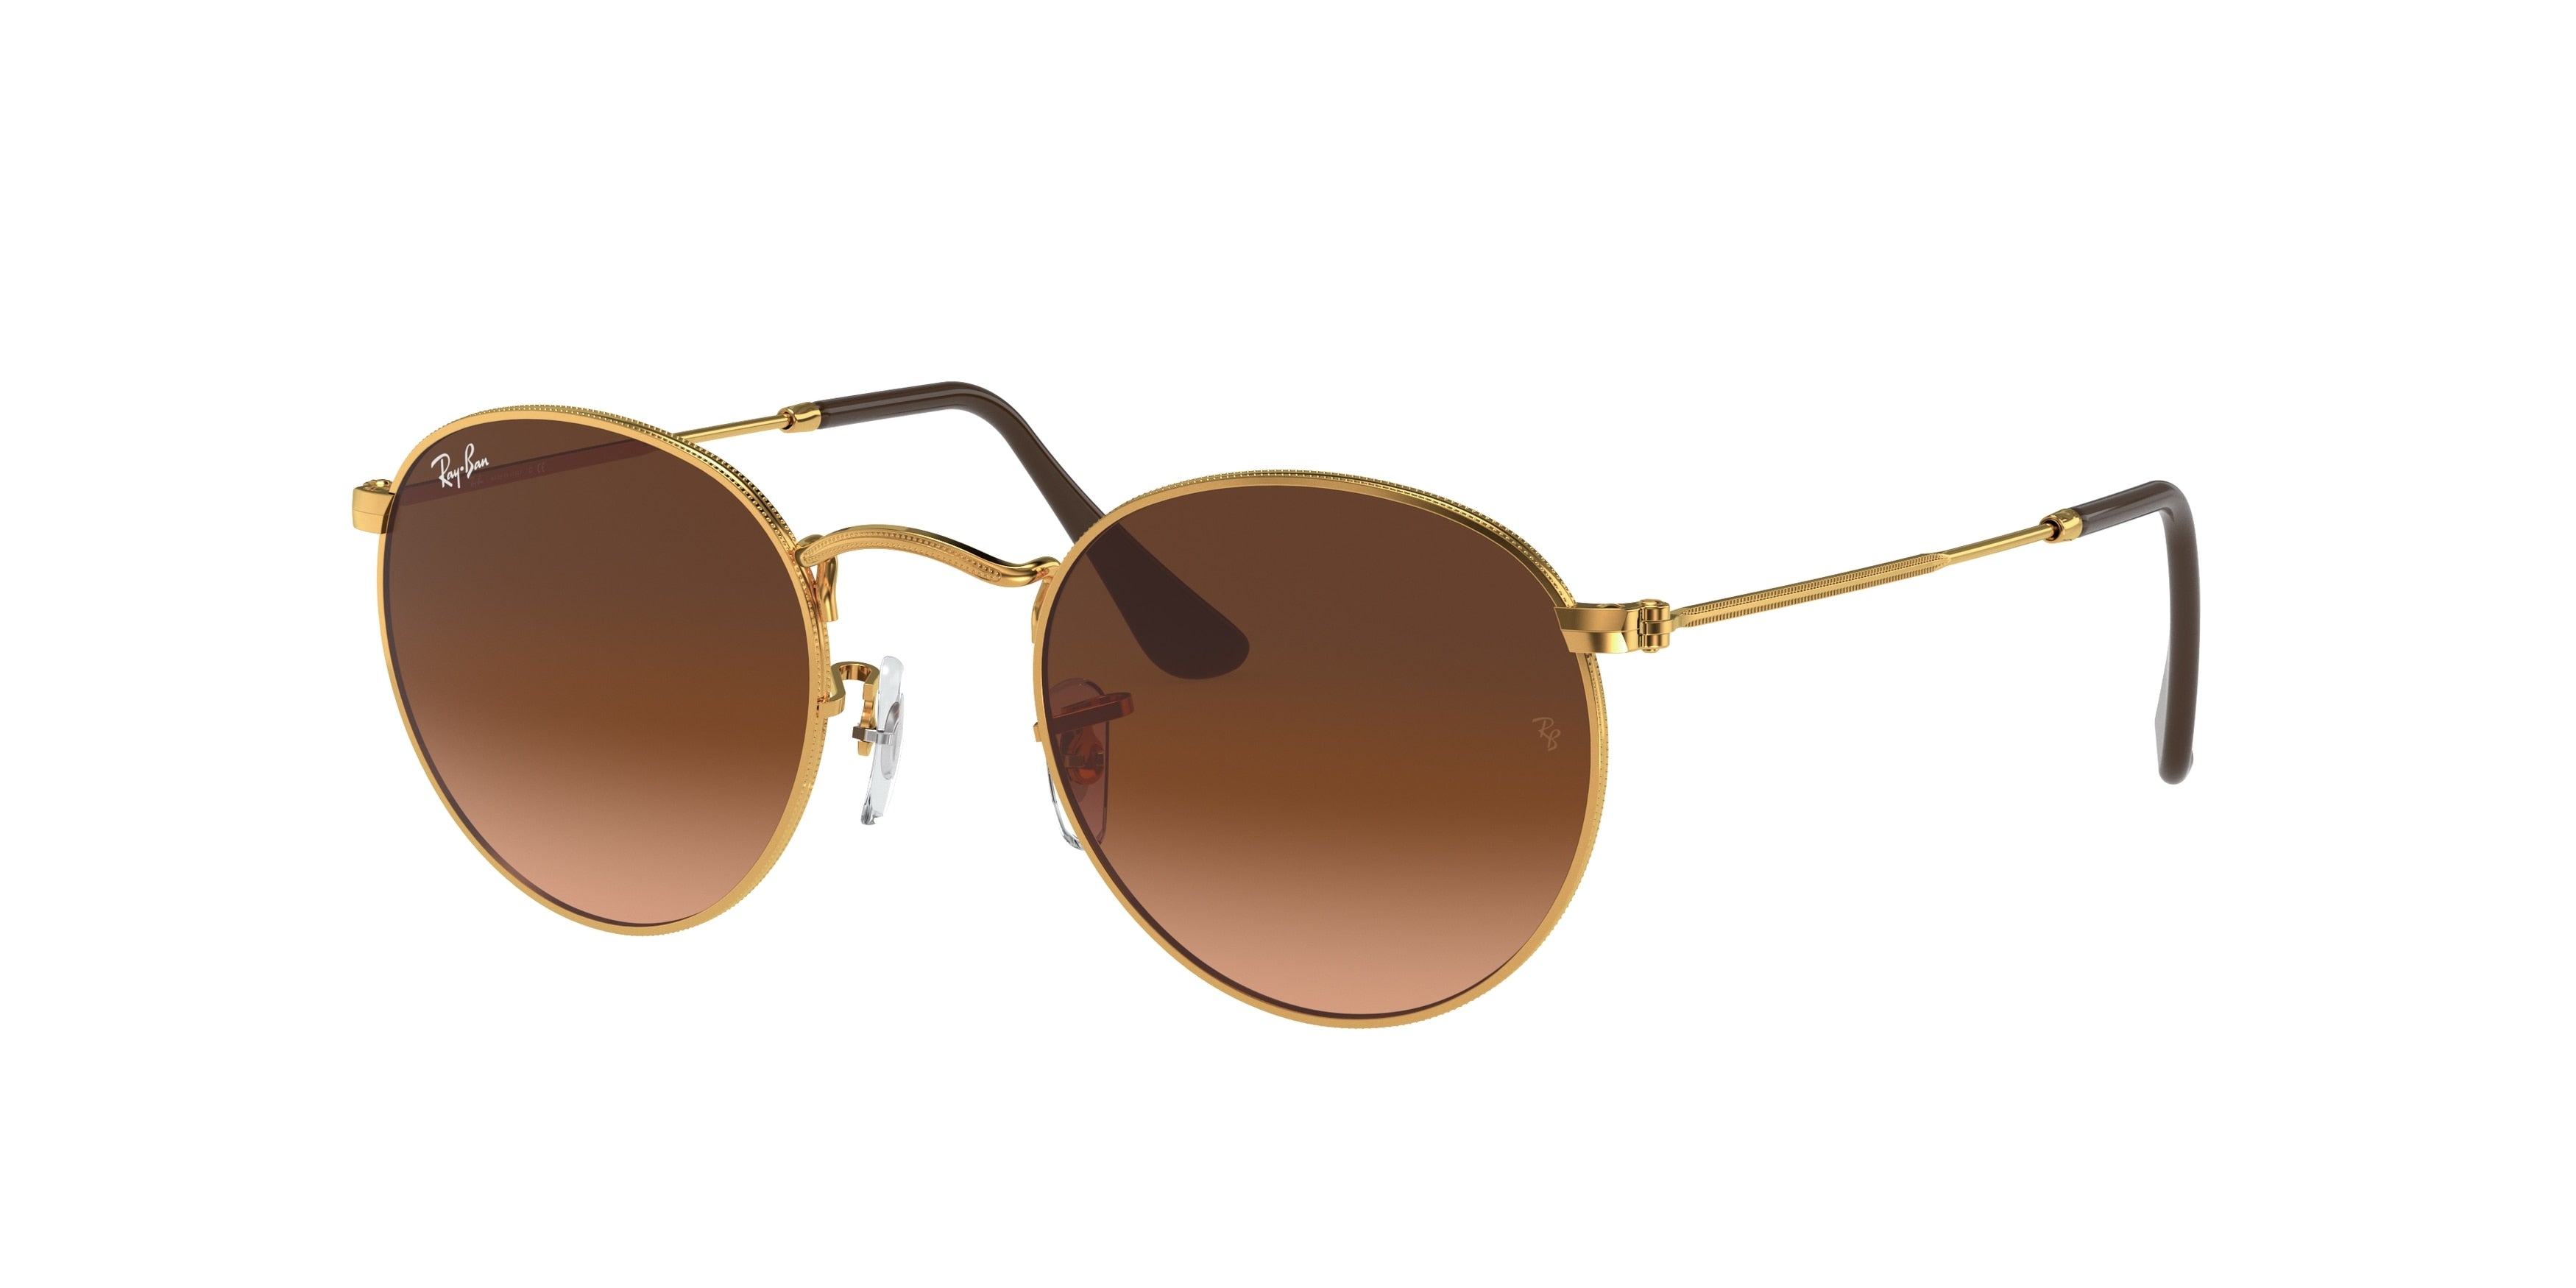 Ray-Ban ROUND METAL RB3447 Round Sunglasses  9001A5-Light Bronze 52-145-21 - Color Map Yellow